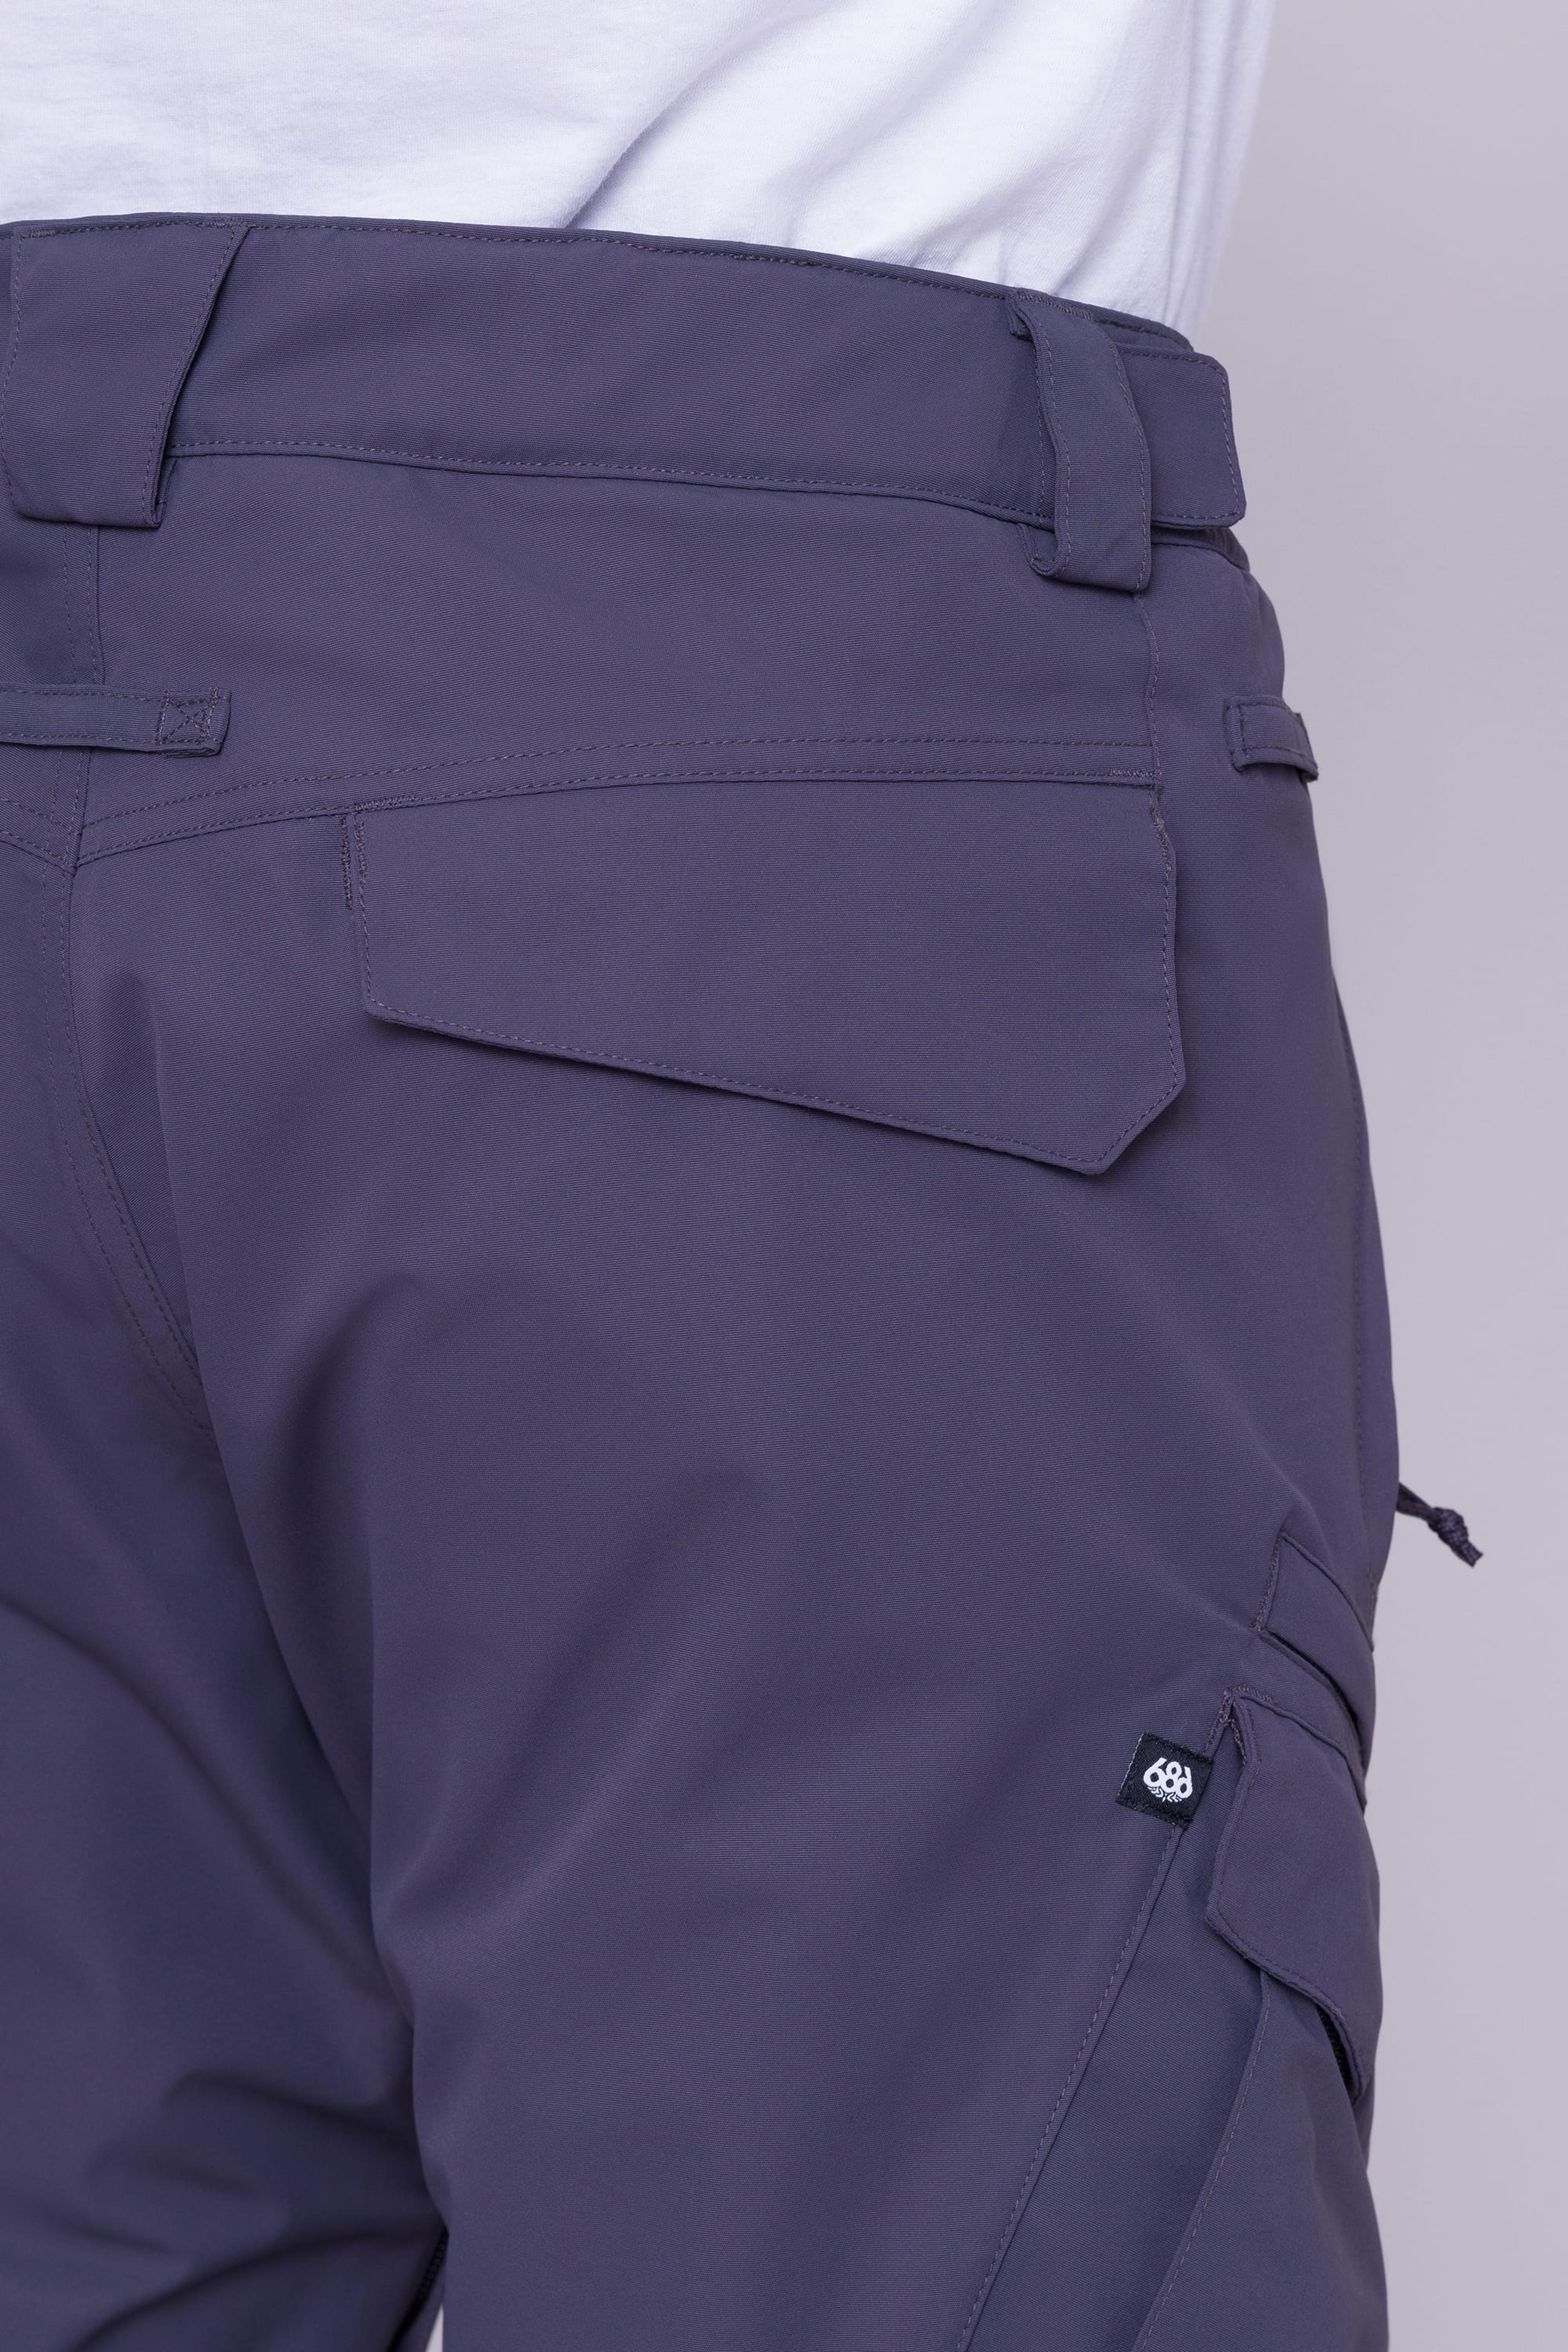 Alternate View 32 of 686 Men's SMARTY 3-in-1 Cargo Pant